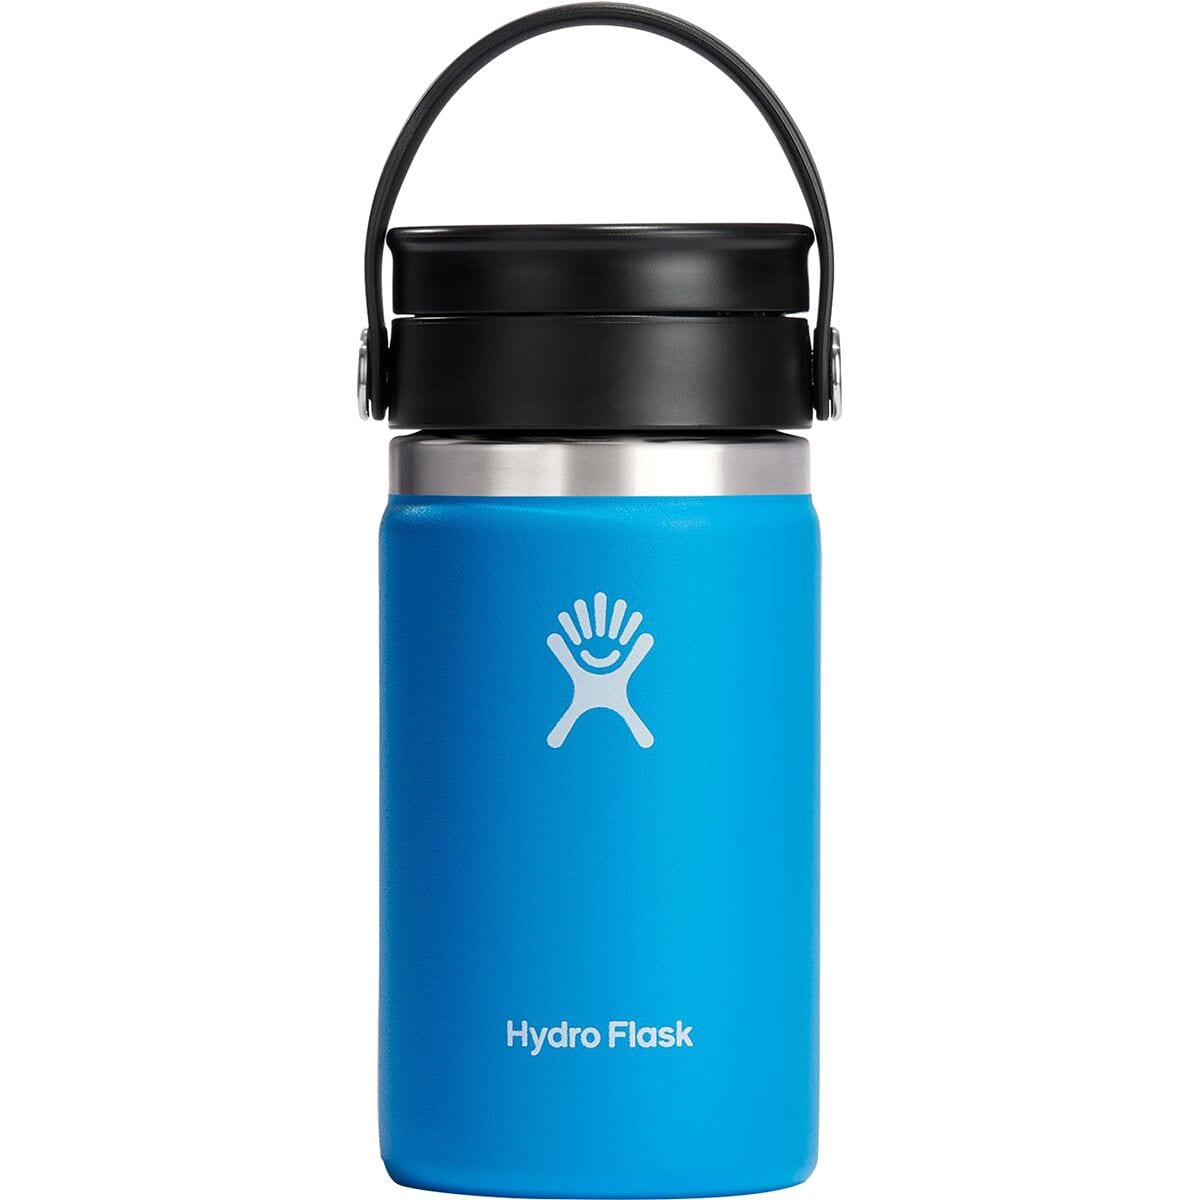  Hydro Flask 12 oz Wide Mouth Bottle with Flex Sip Lid Rain :  Home & Kitchen